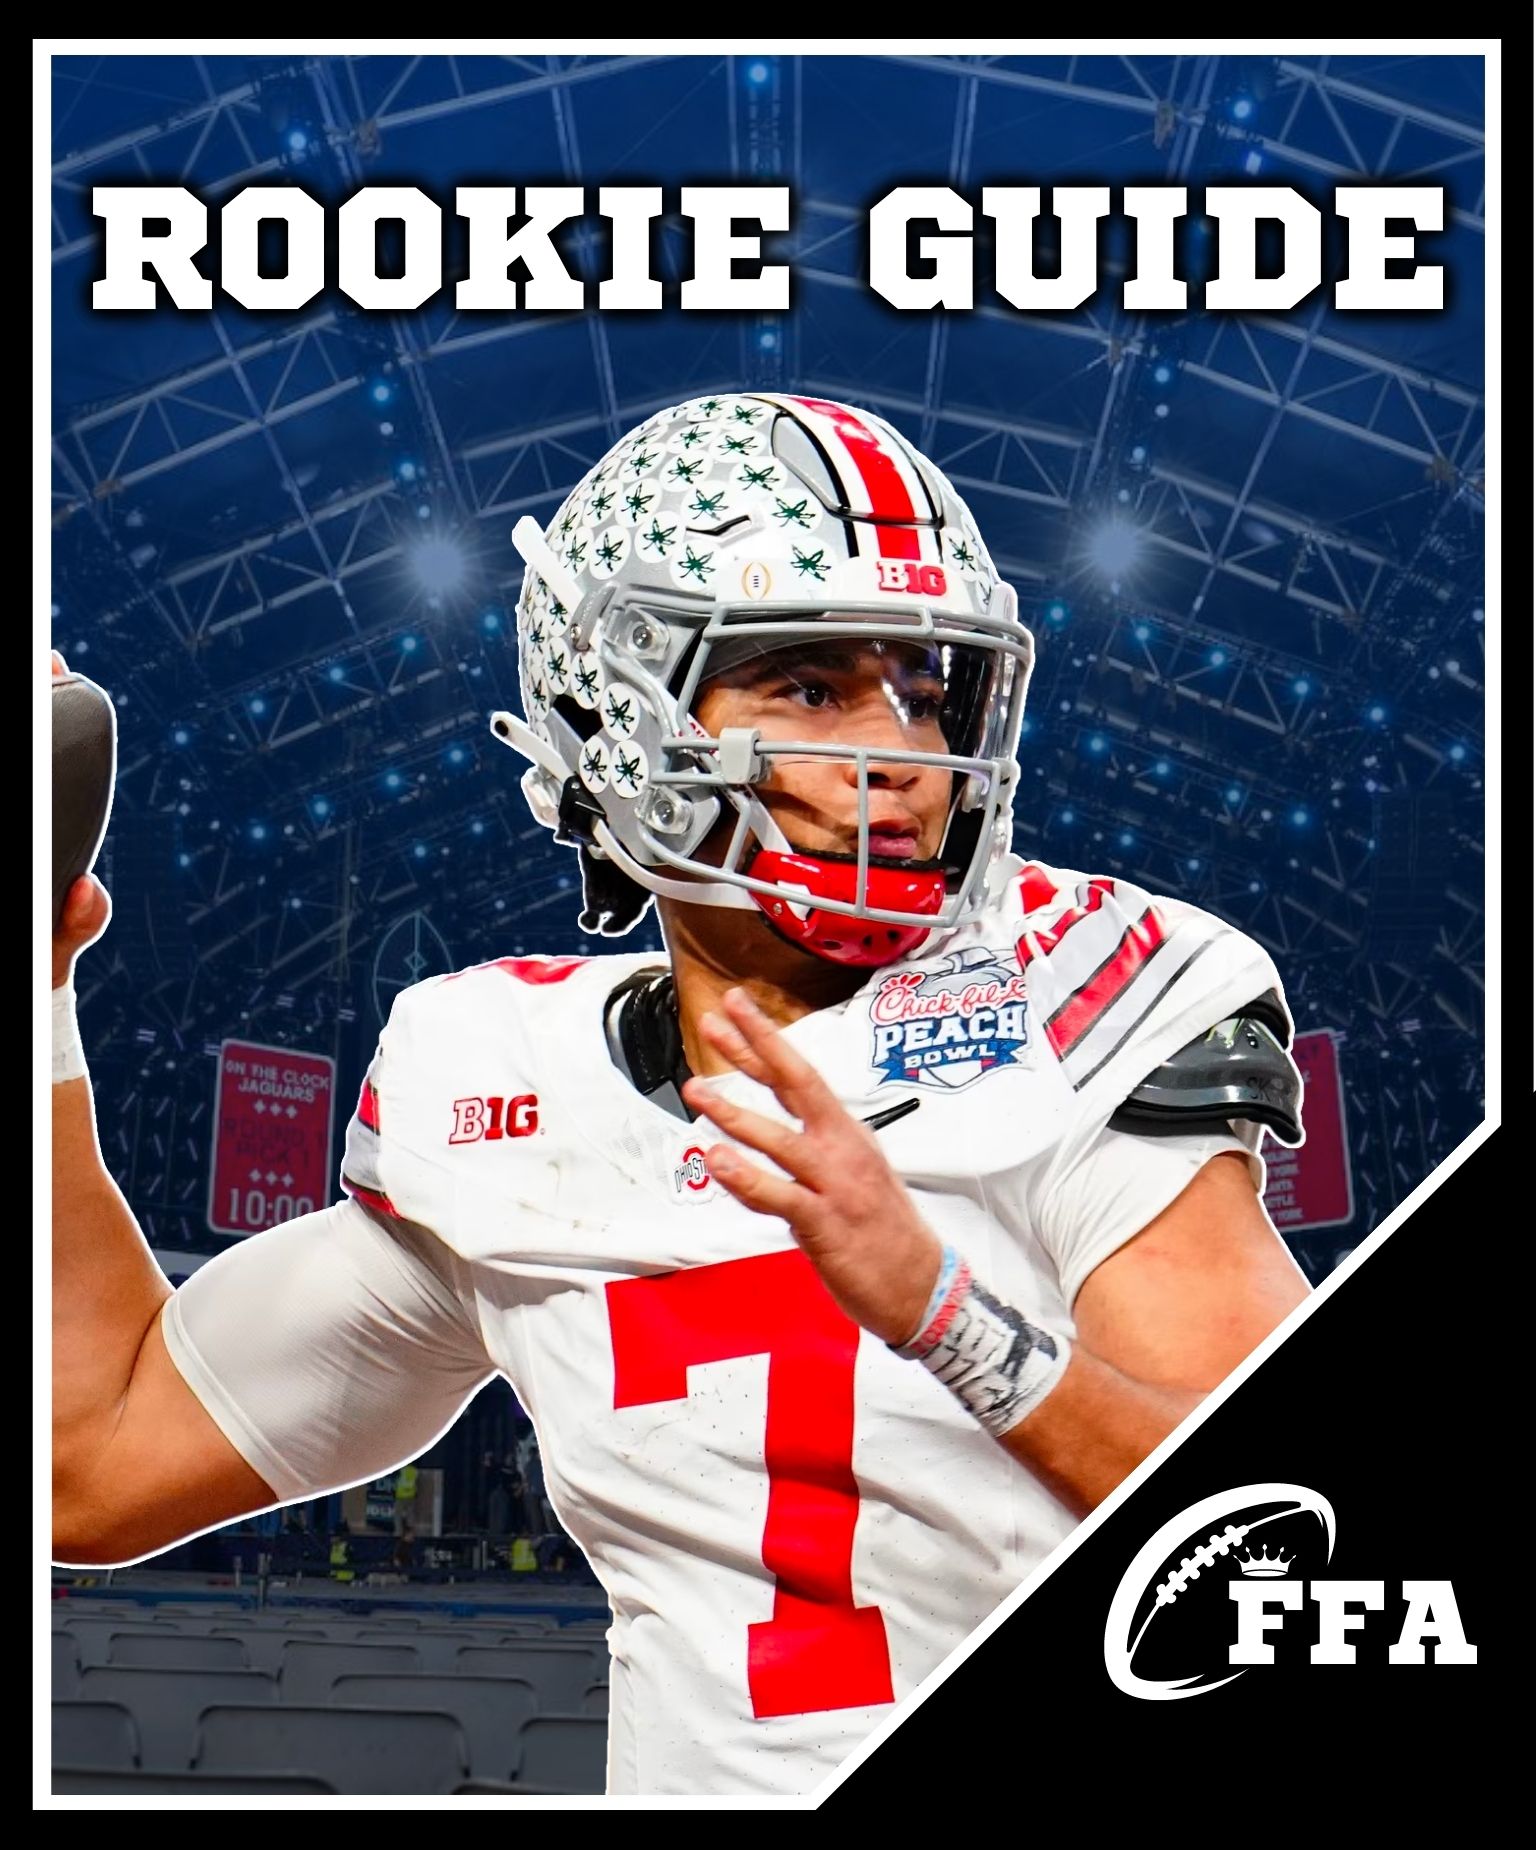 Rookie Guide Fantasy Football Assist